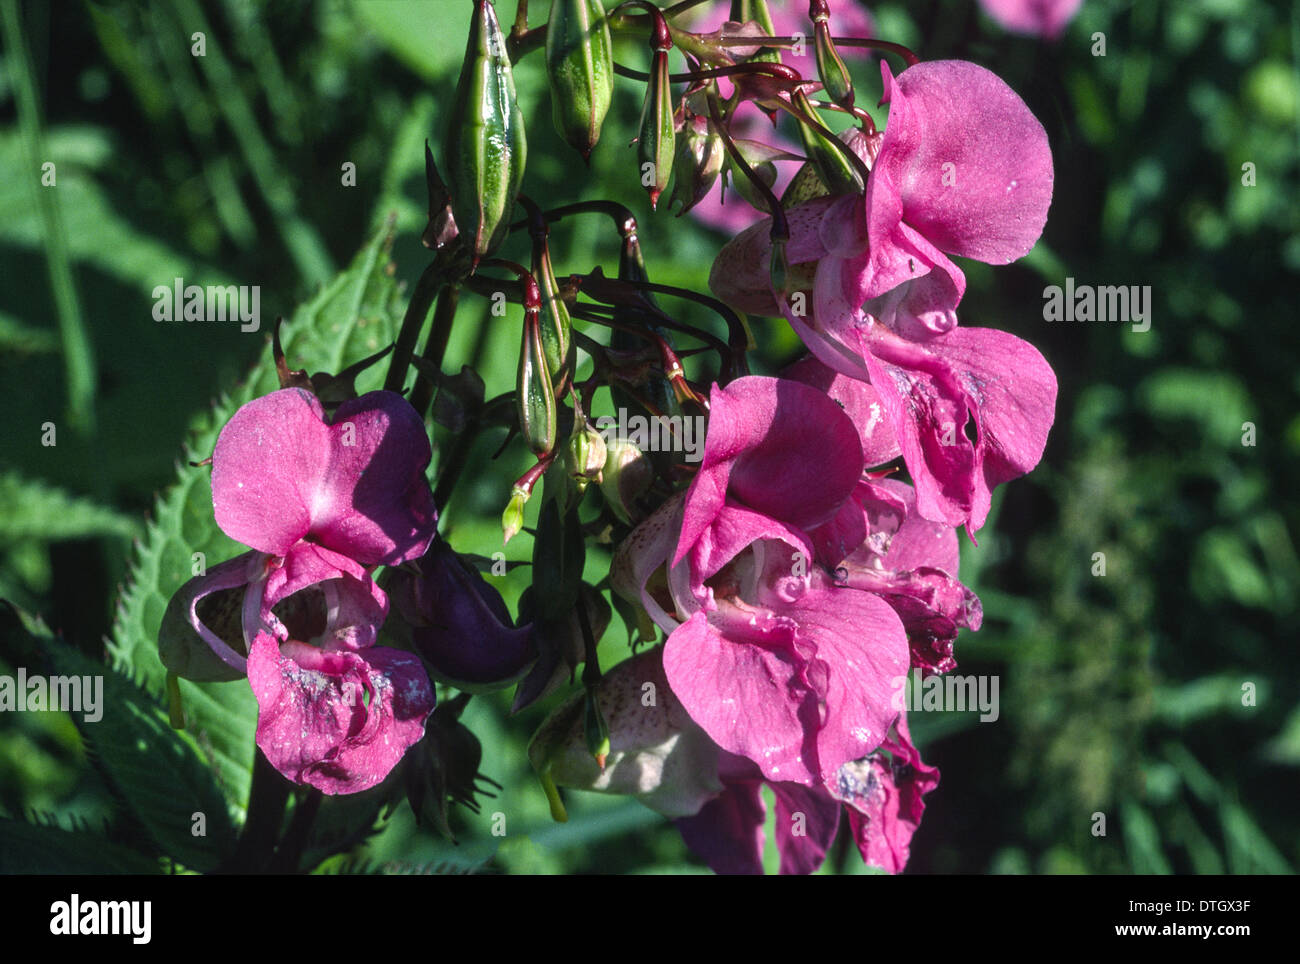 DEEP PINK FLOWERS AND GREEN SEED PODS OF THE HIMALAYAN BALSAM PLANT [ Impatiens glandulifera ] Stock Photo